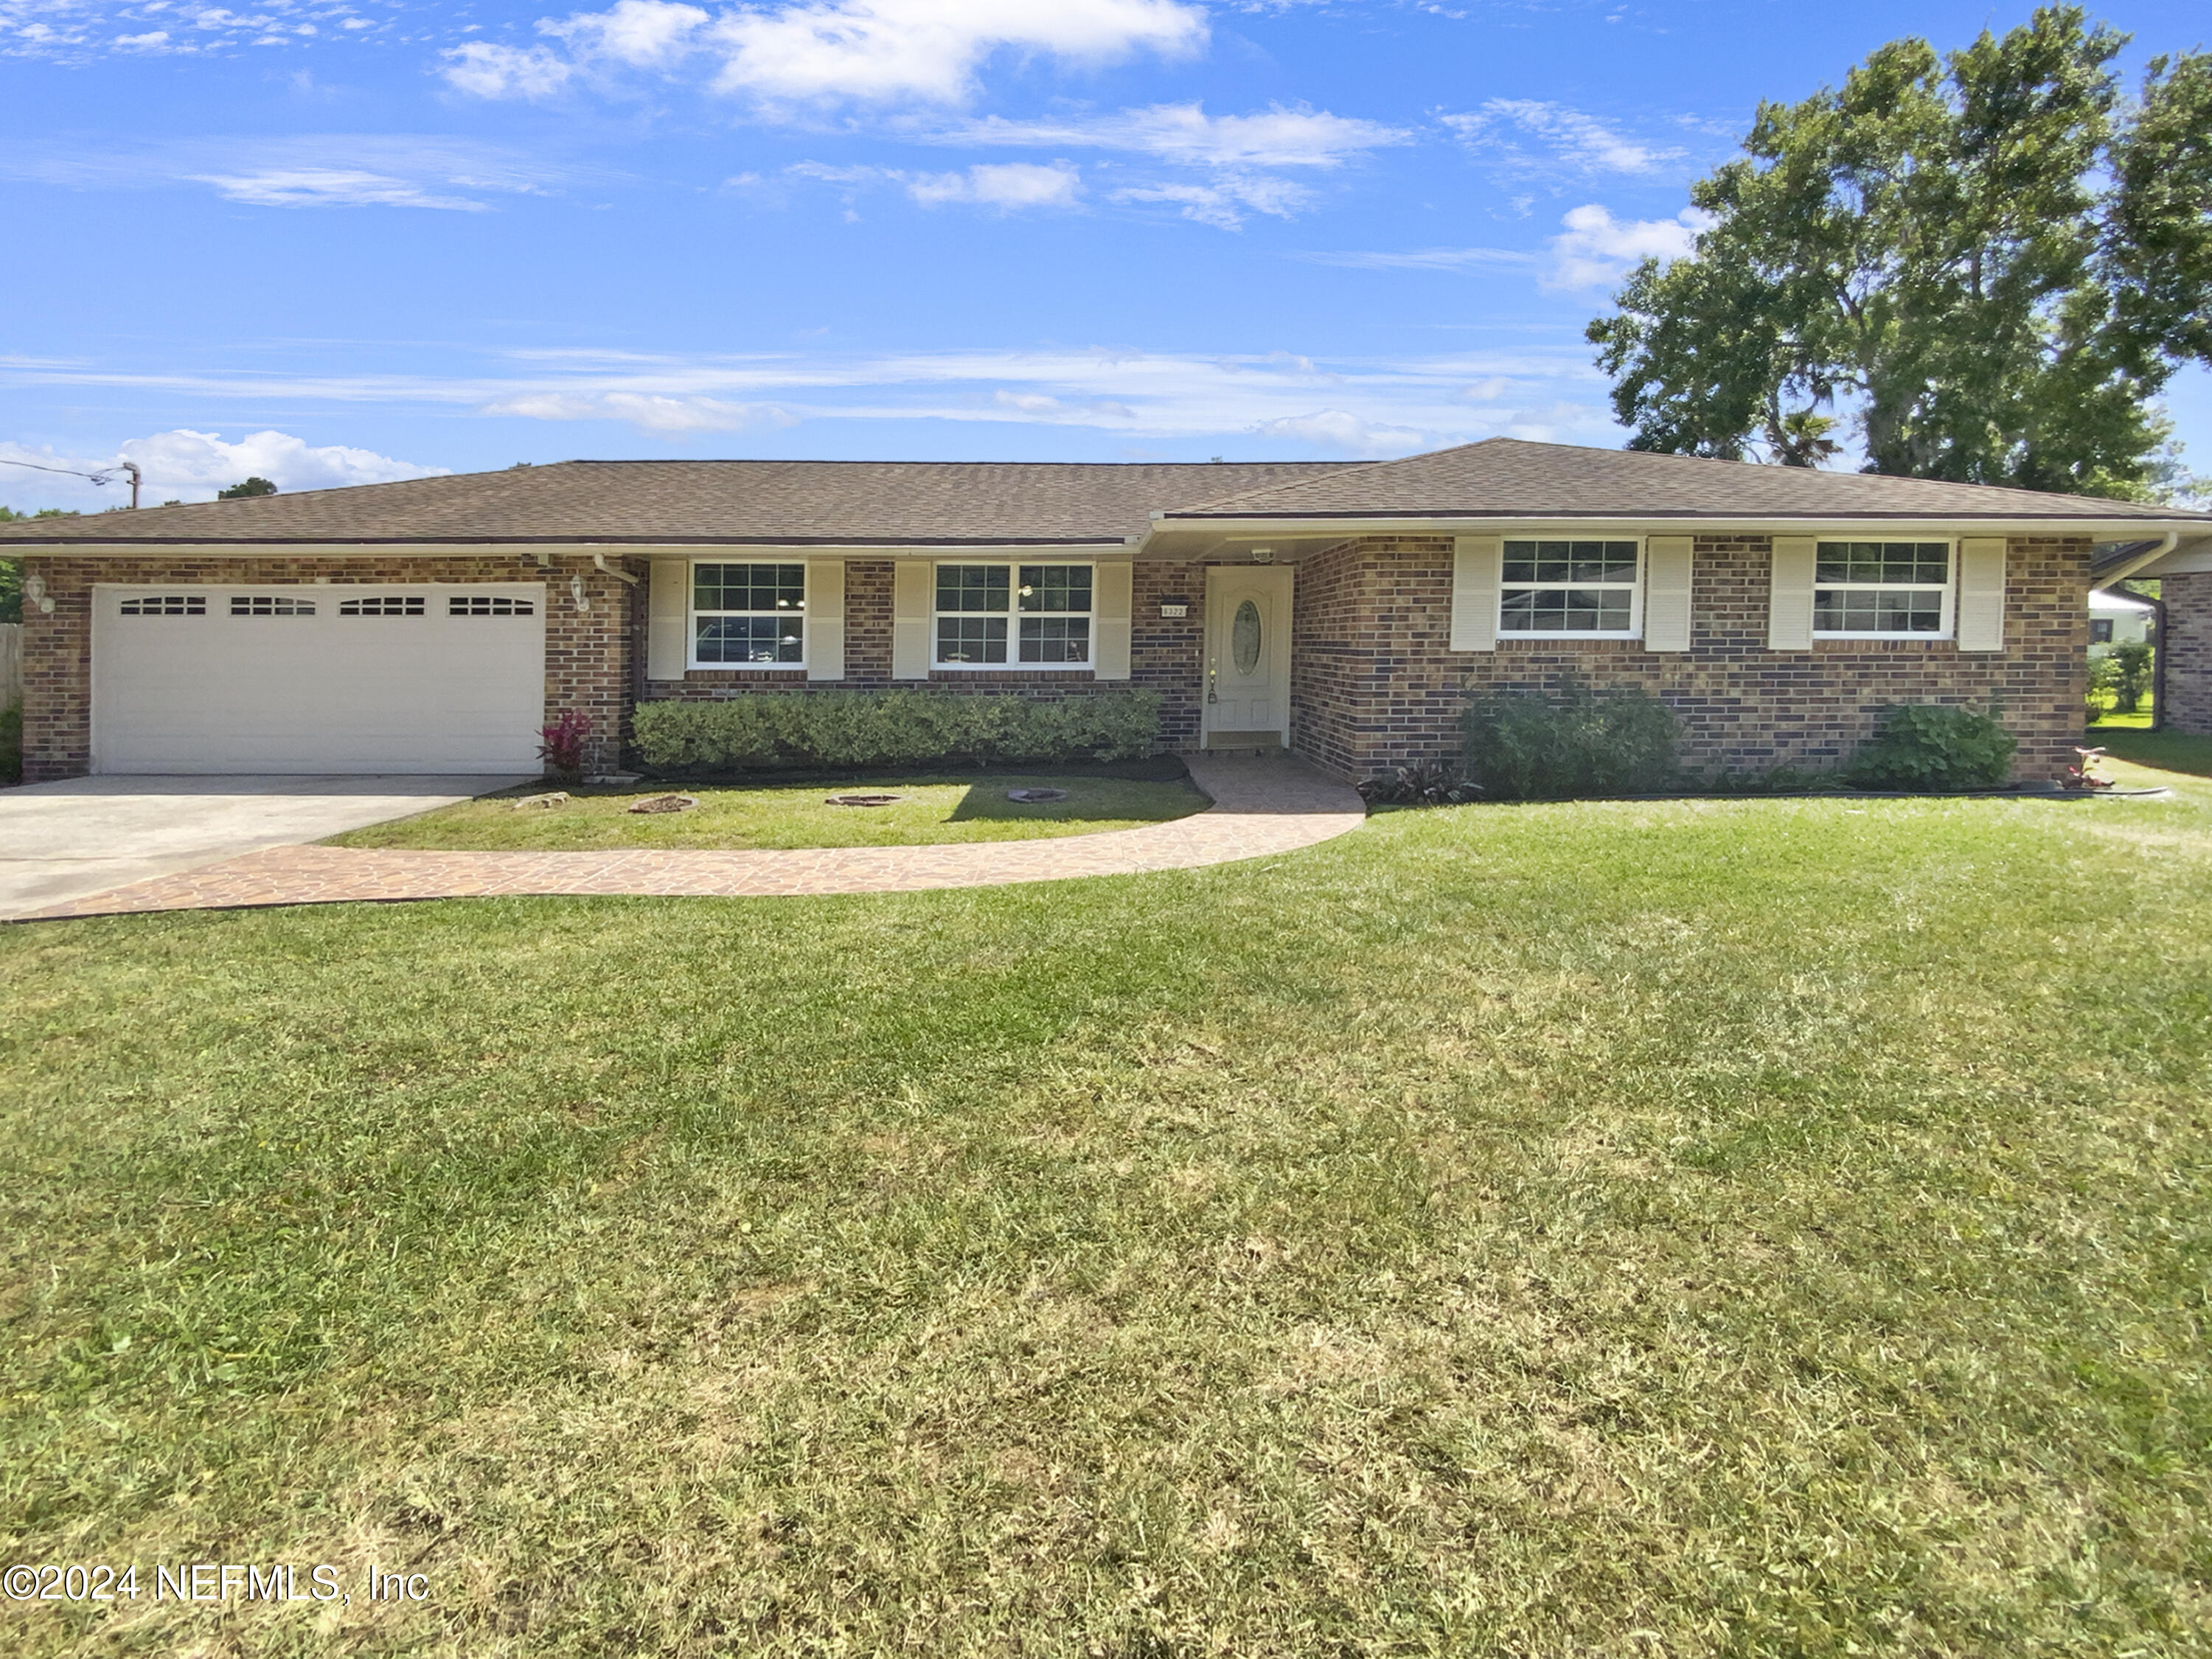 Jacksonville, FL home for sale located at 6322 Townsend Road, Jacksonville, FL 32244